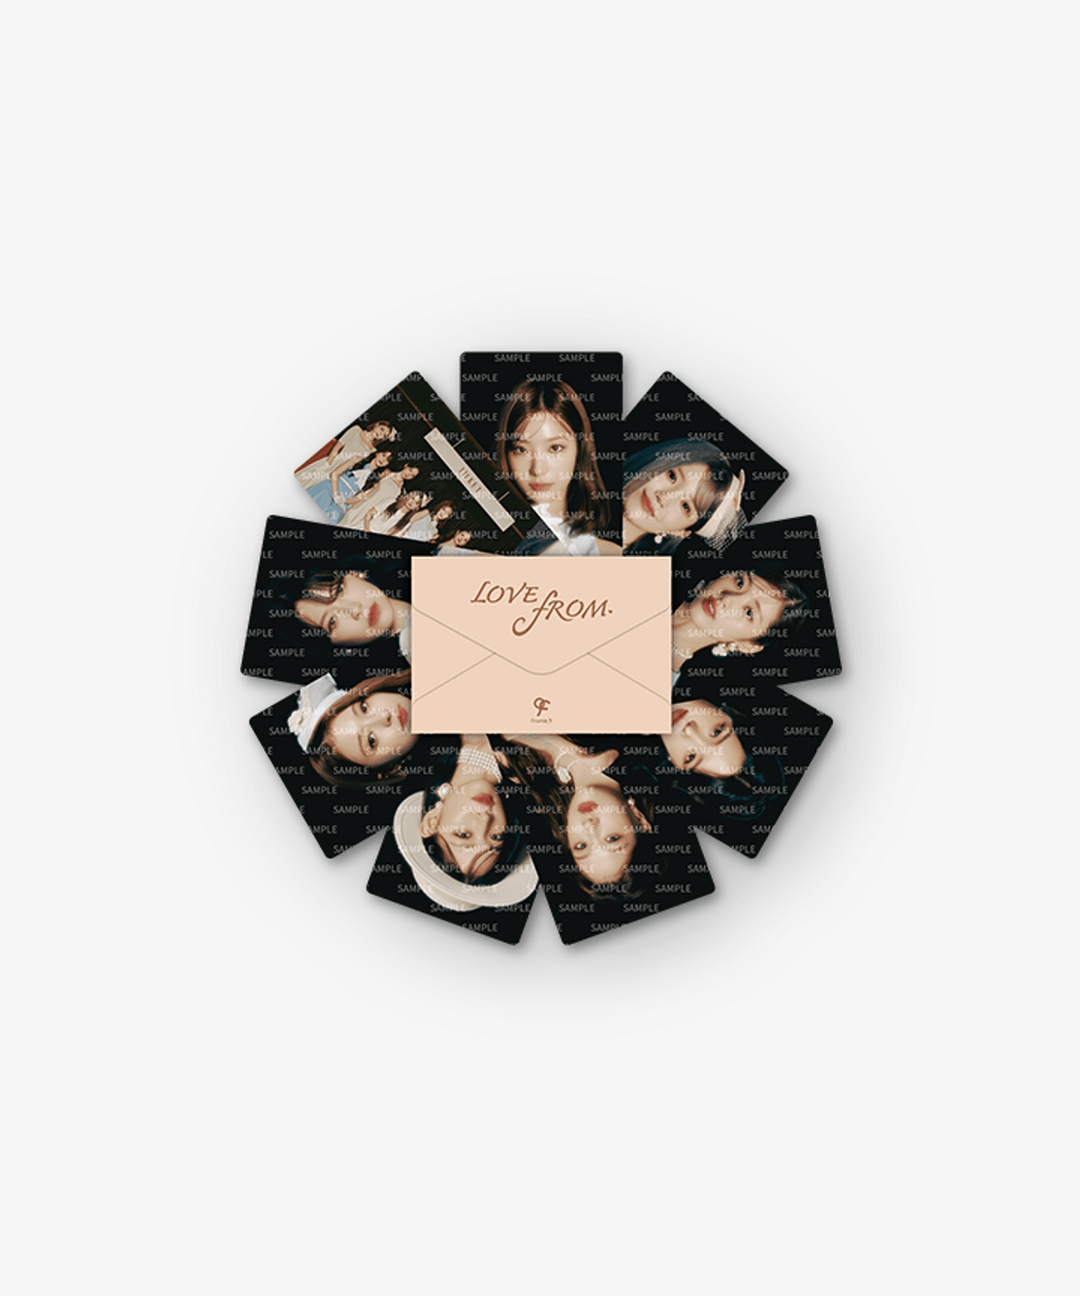 2022 fromis_9 concert "Love From" - Photocard Set